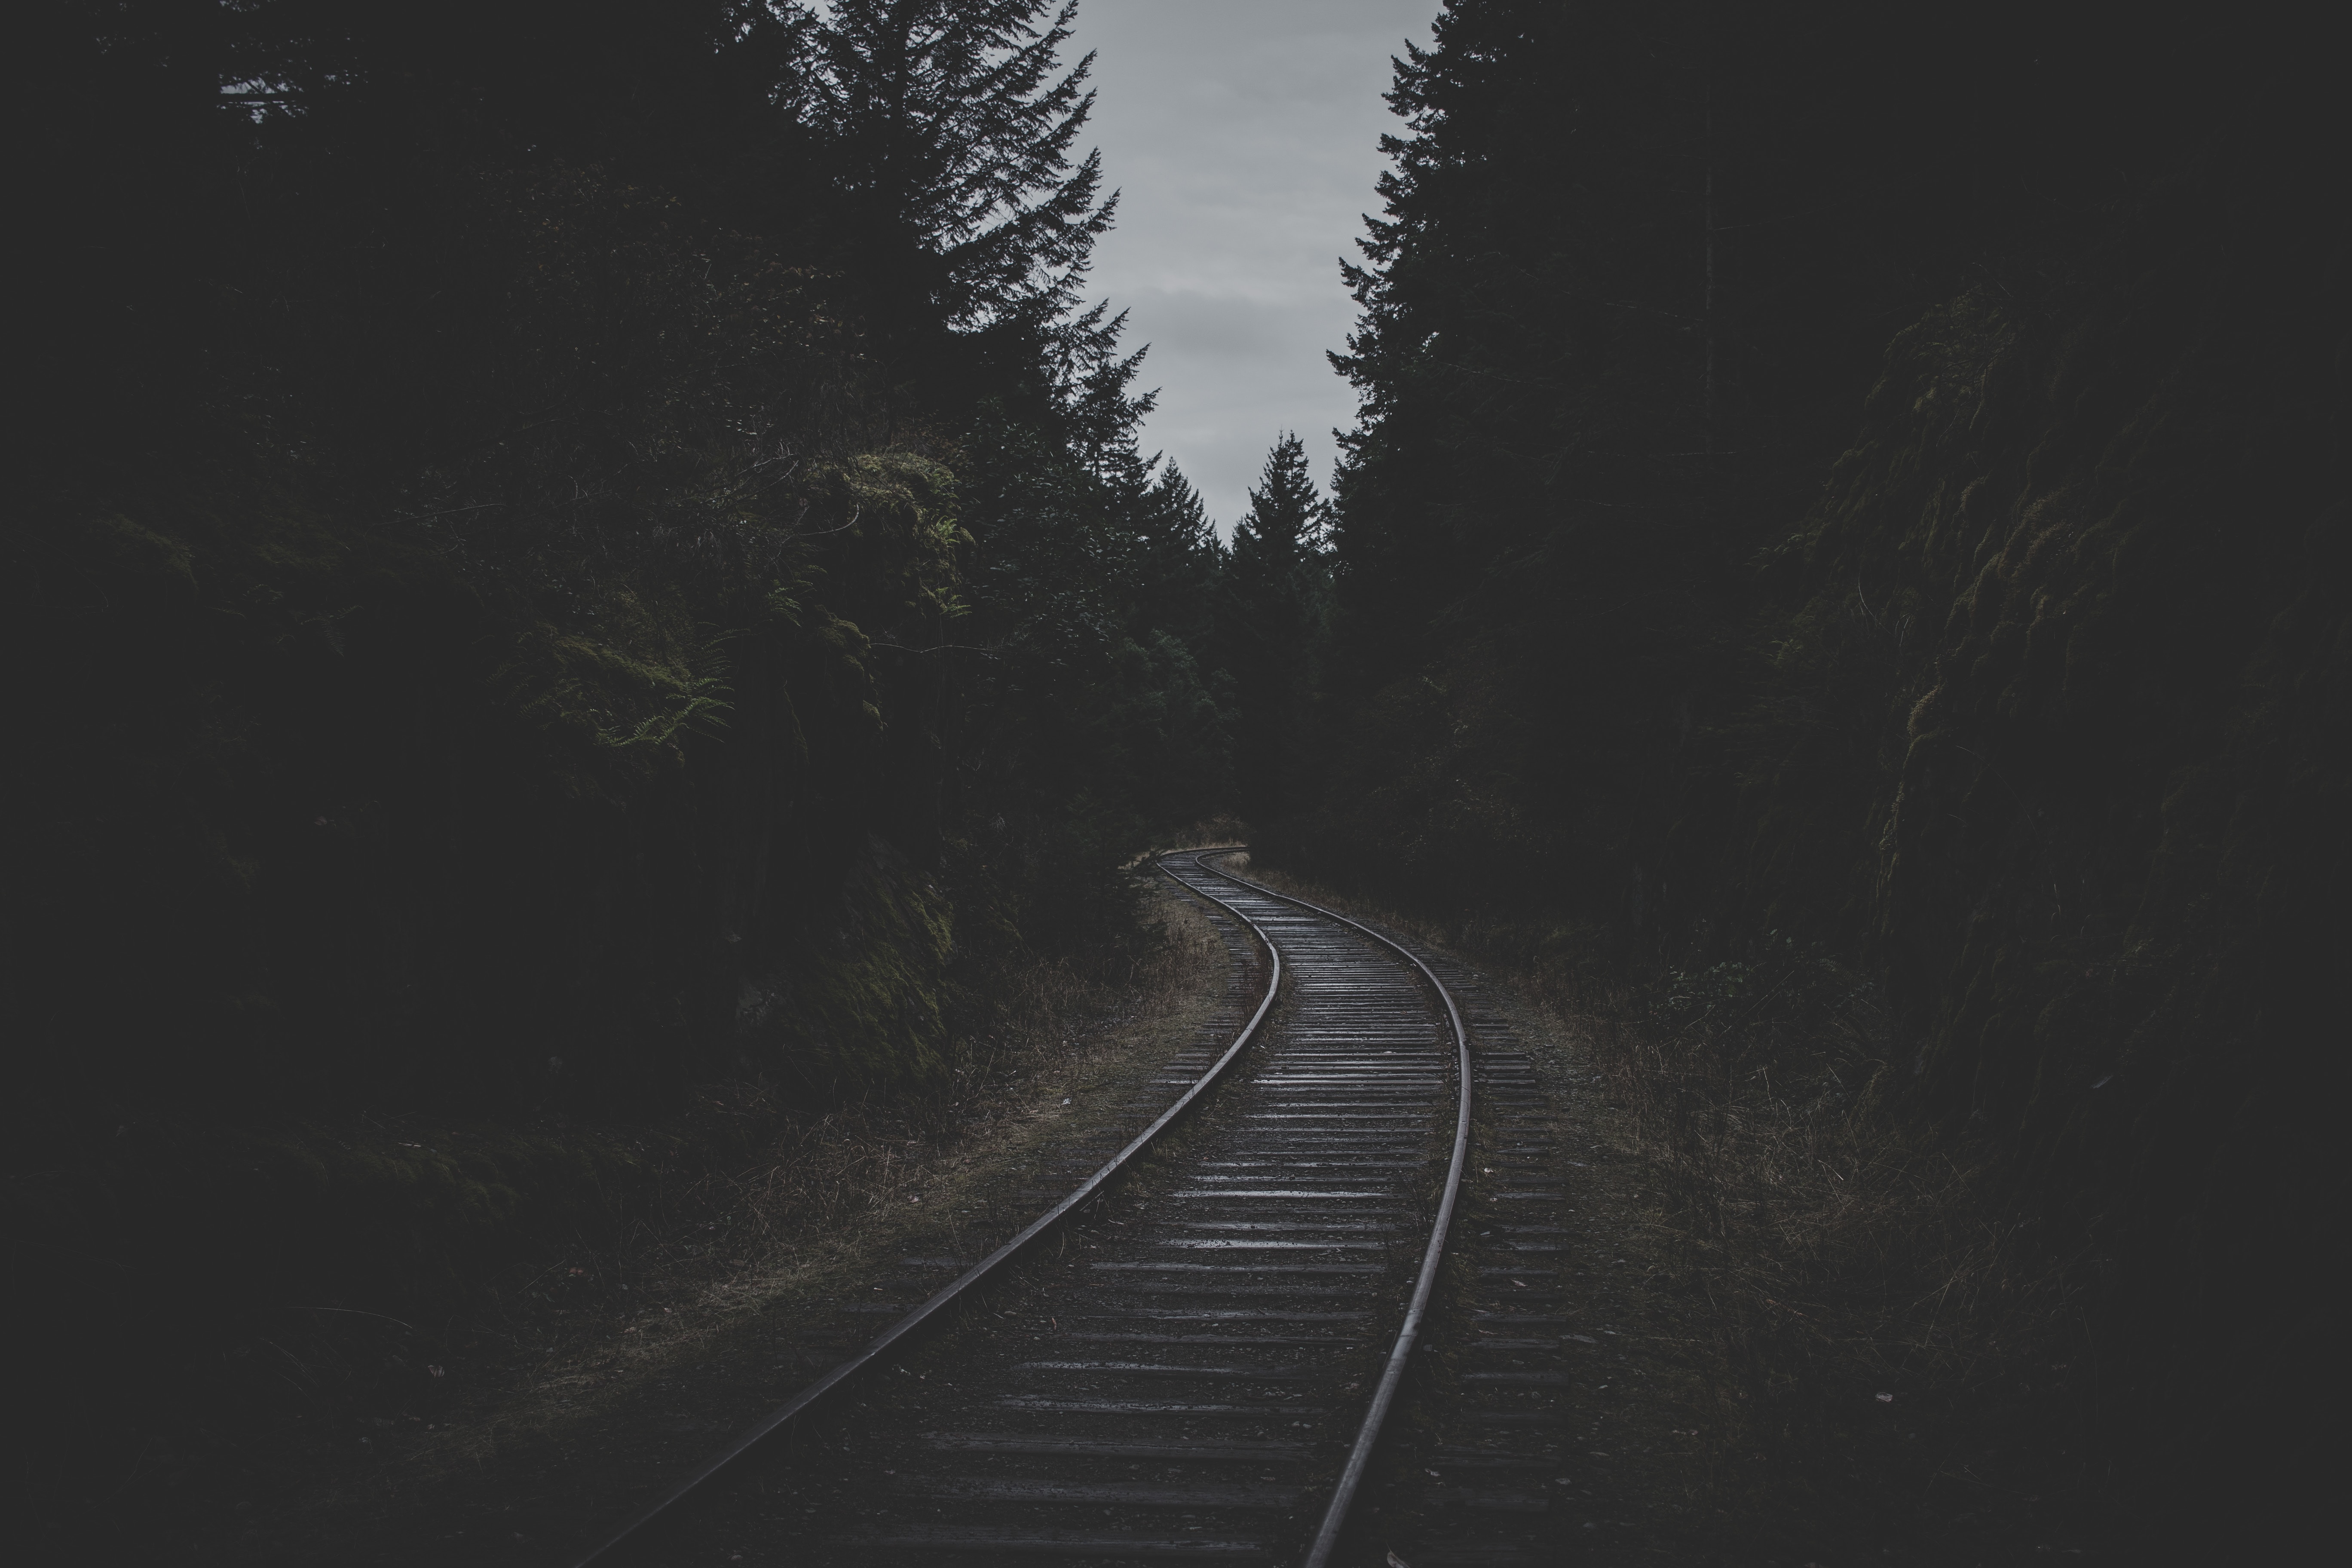 131224 download wallpaper black, trees, twilight, dark, dusk, railway, rails screensavers and pictures for free